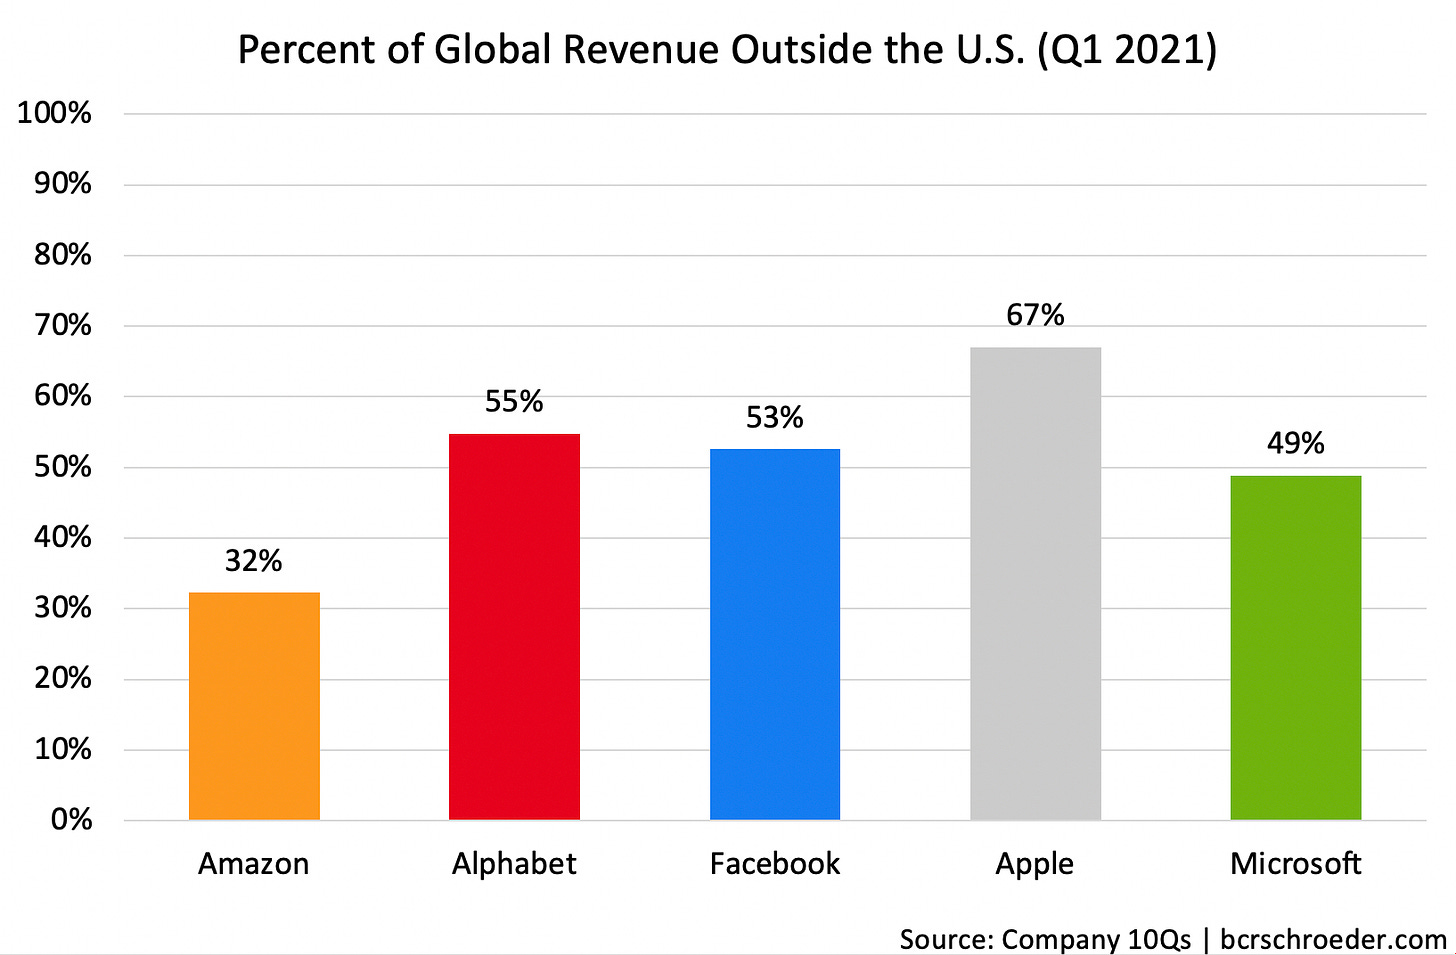 Chart showing % of global revenue outside the U.S. for Amazon, Alphabet, Facebook, Apple and Microsoft